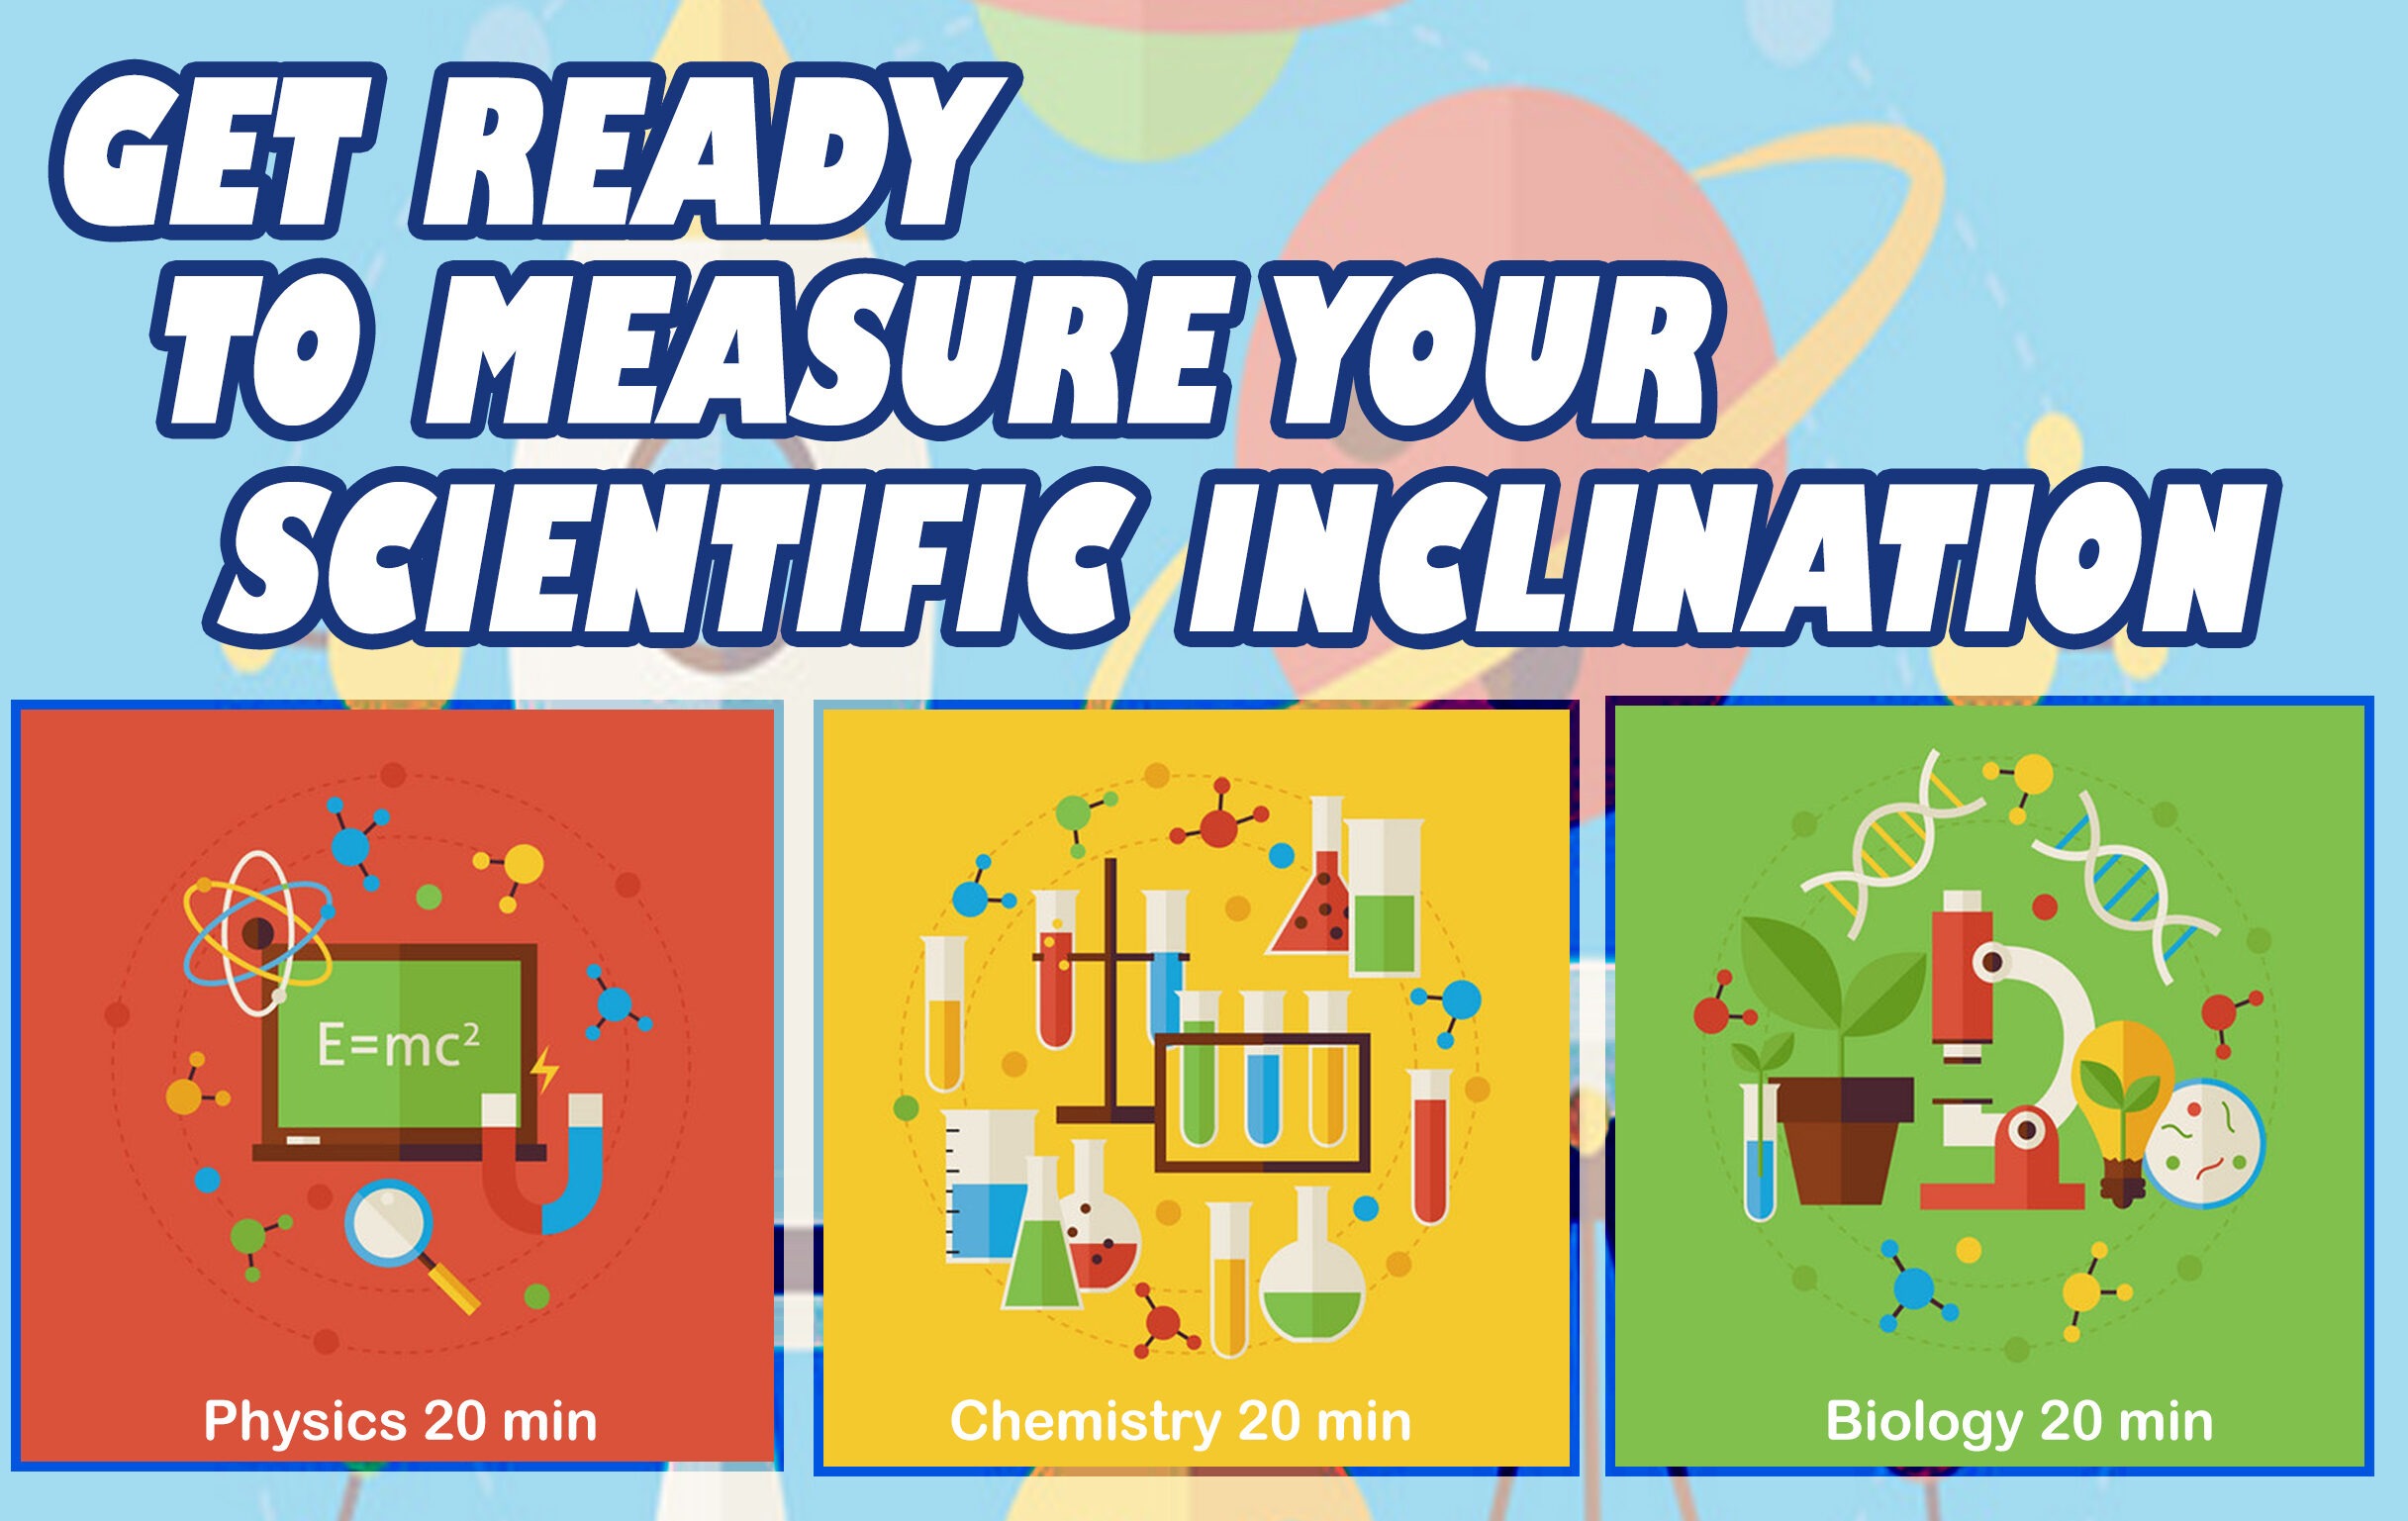 Get ready to measure your Scientific Inclination